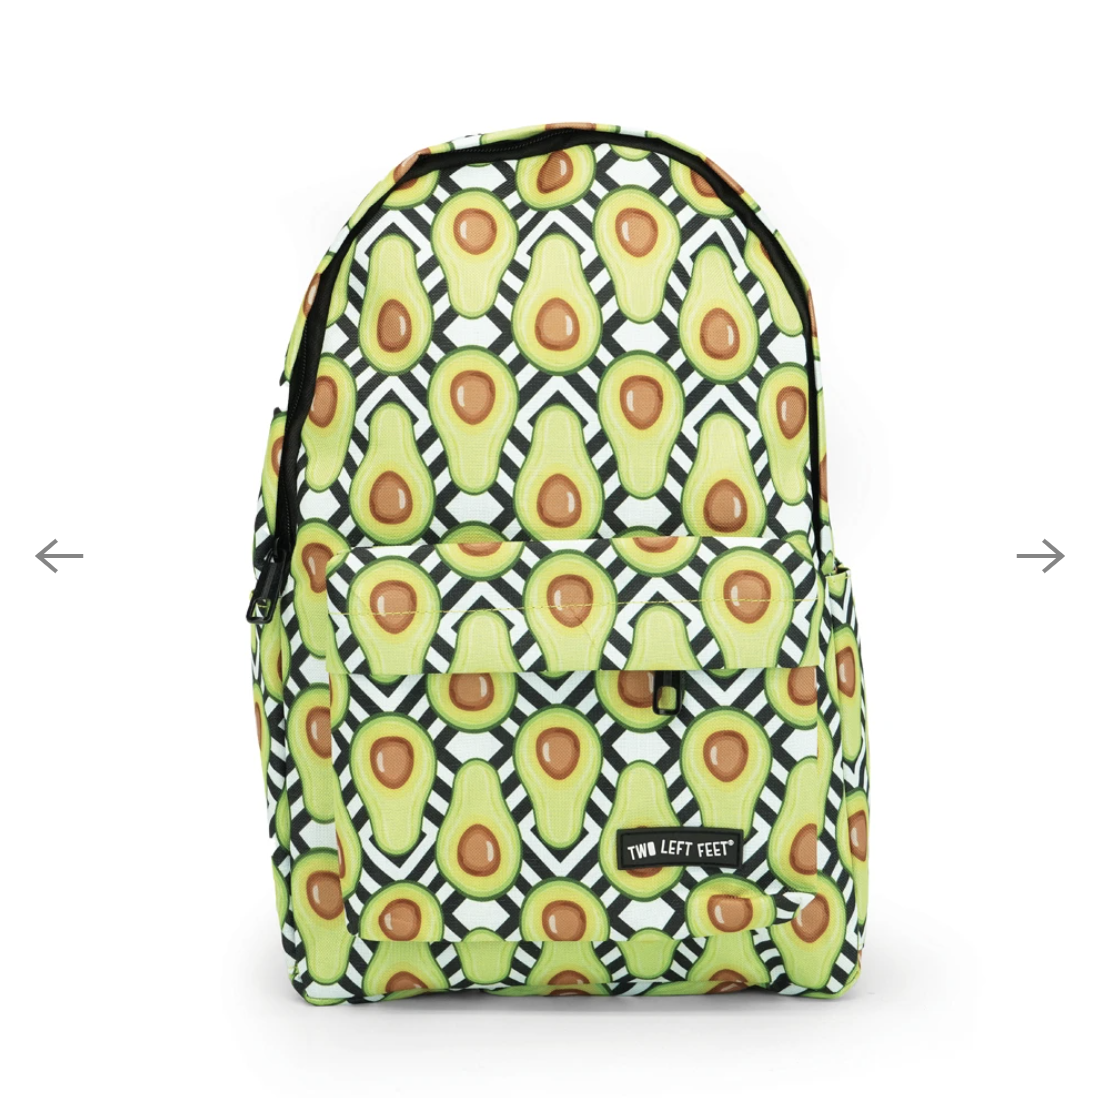 Two Left Feet Backpack - Avo Great Day (Small 15x10x4.5 inches)-Two Left Feet-Little Giant Kidz